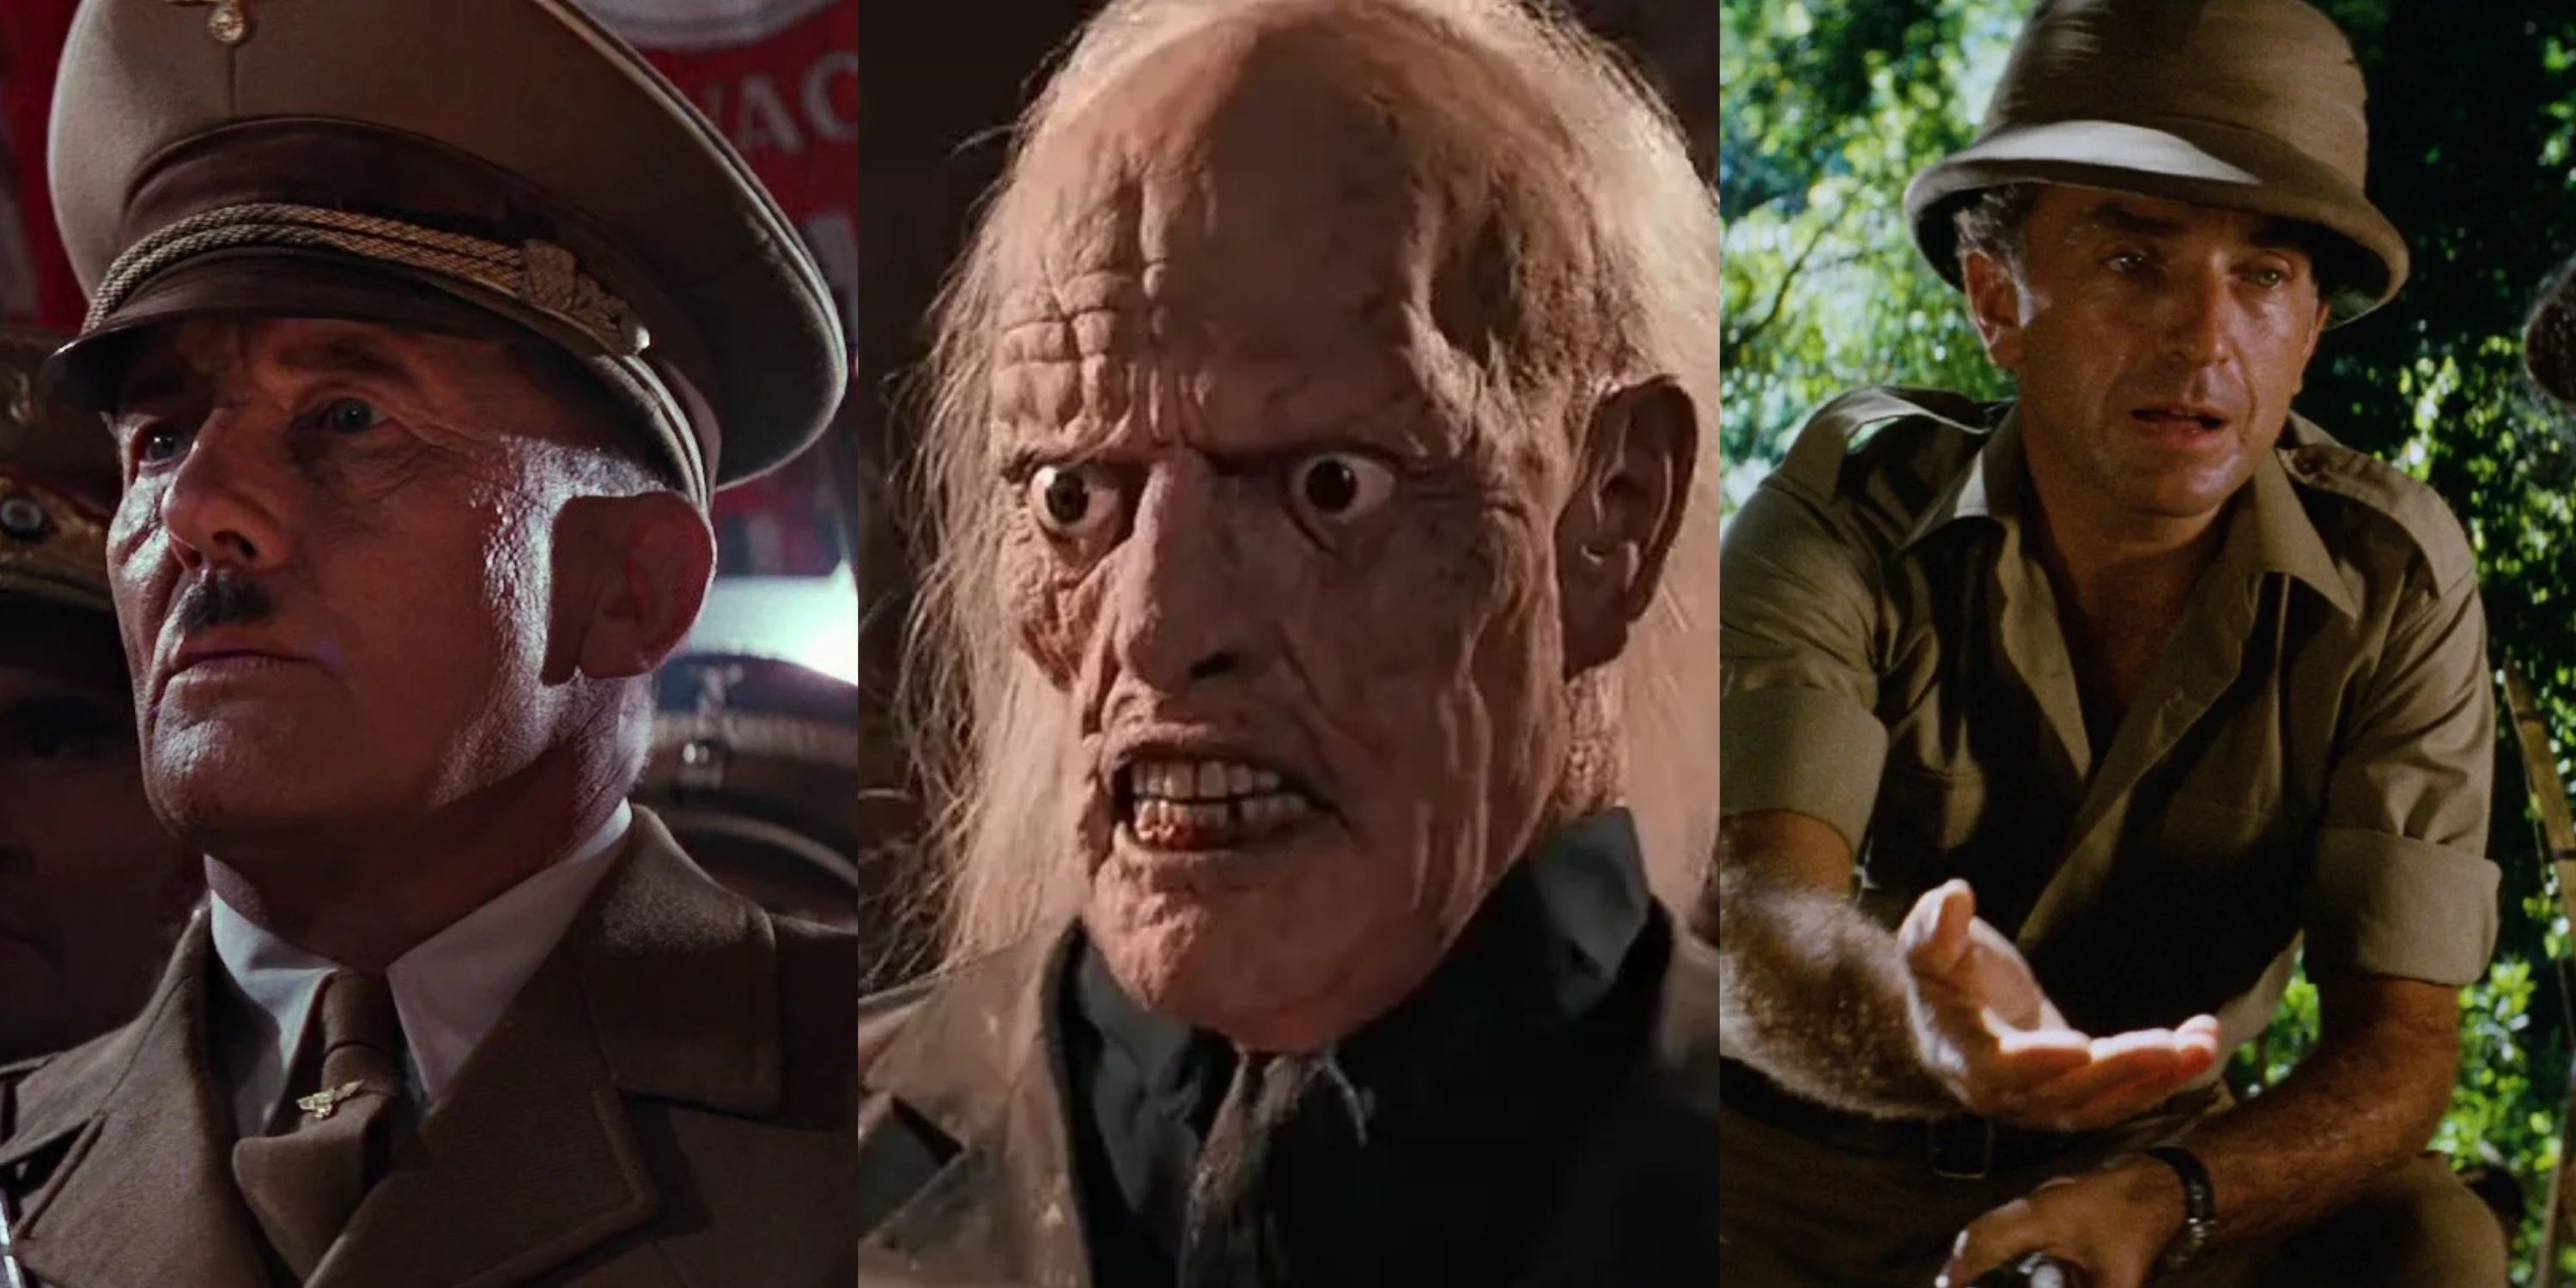 Split image Hitler, Walter Donovan aged, and Belloq from Indiana Jones.